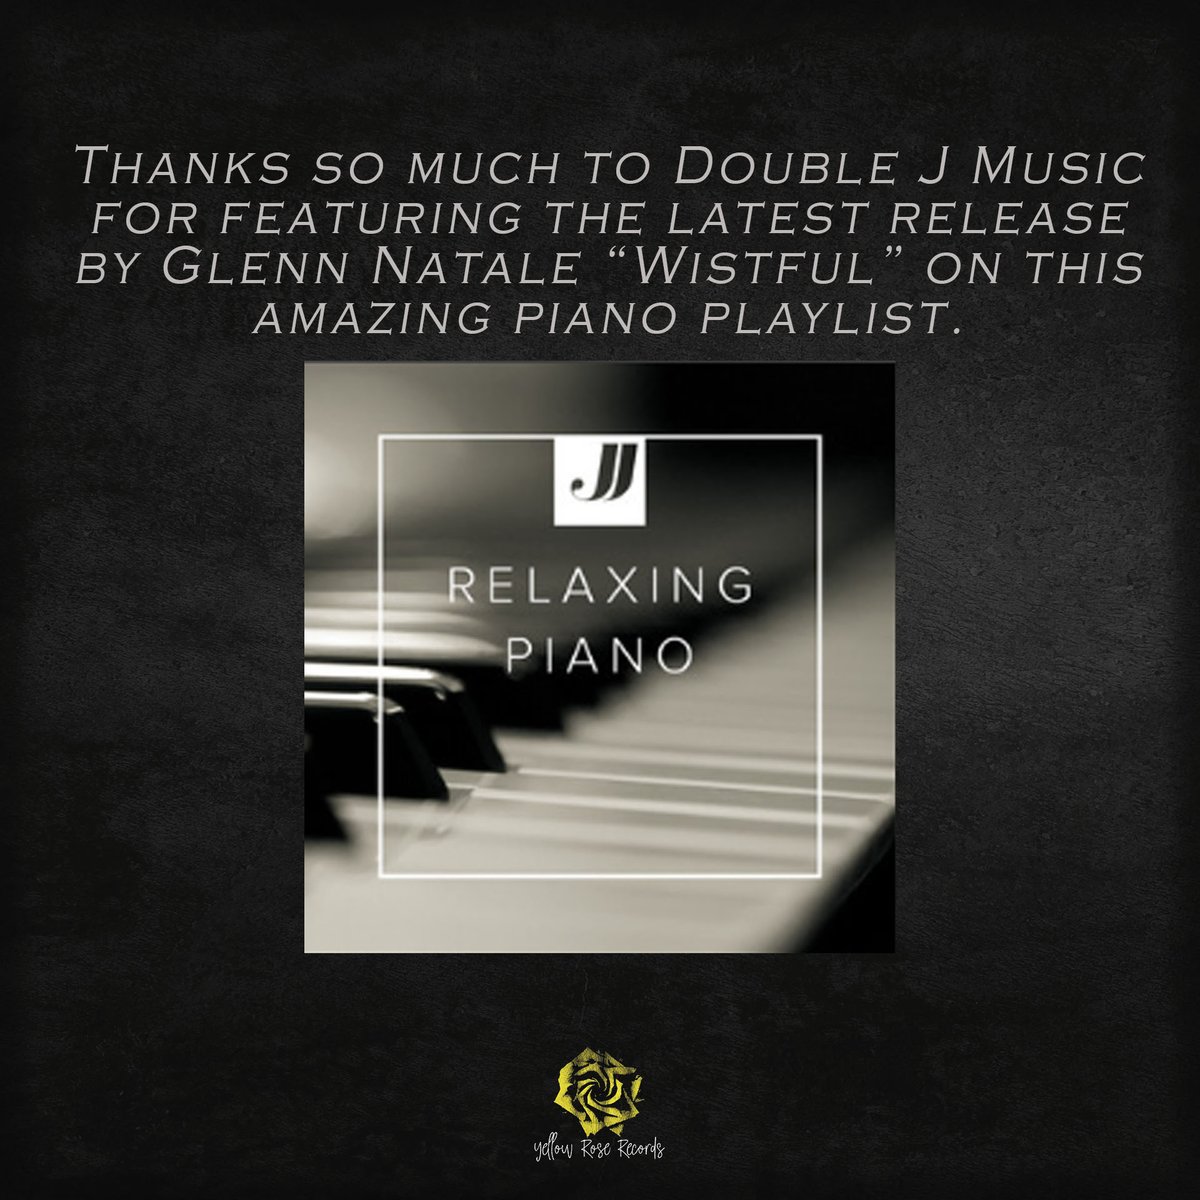 Thanks so much to Double J Music for featuring the latest release by Glenn Natale “Wistful” on this amazing piano playlist. Check it out here: open.spotify.com/playlist/0OOZz… @dbljmusic @natale_glenn